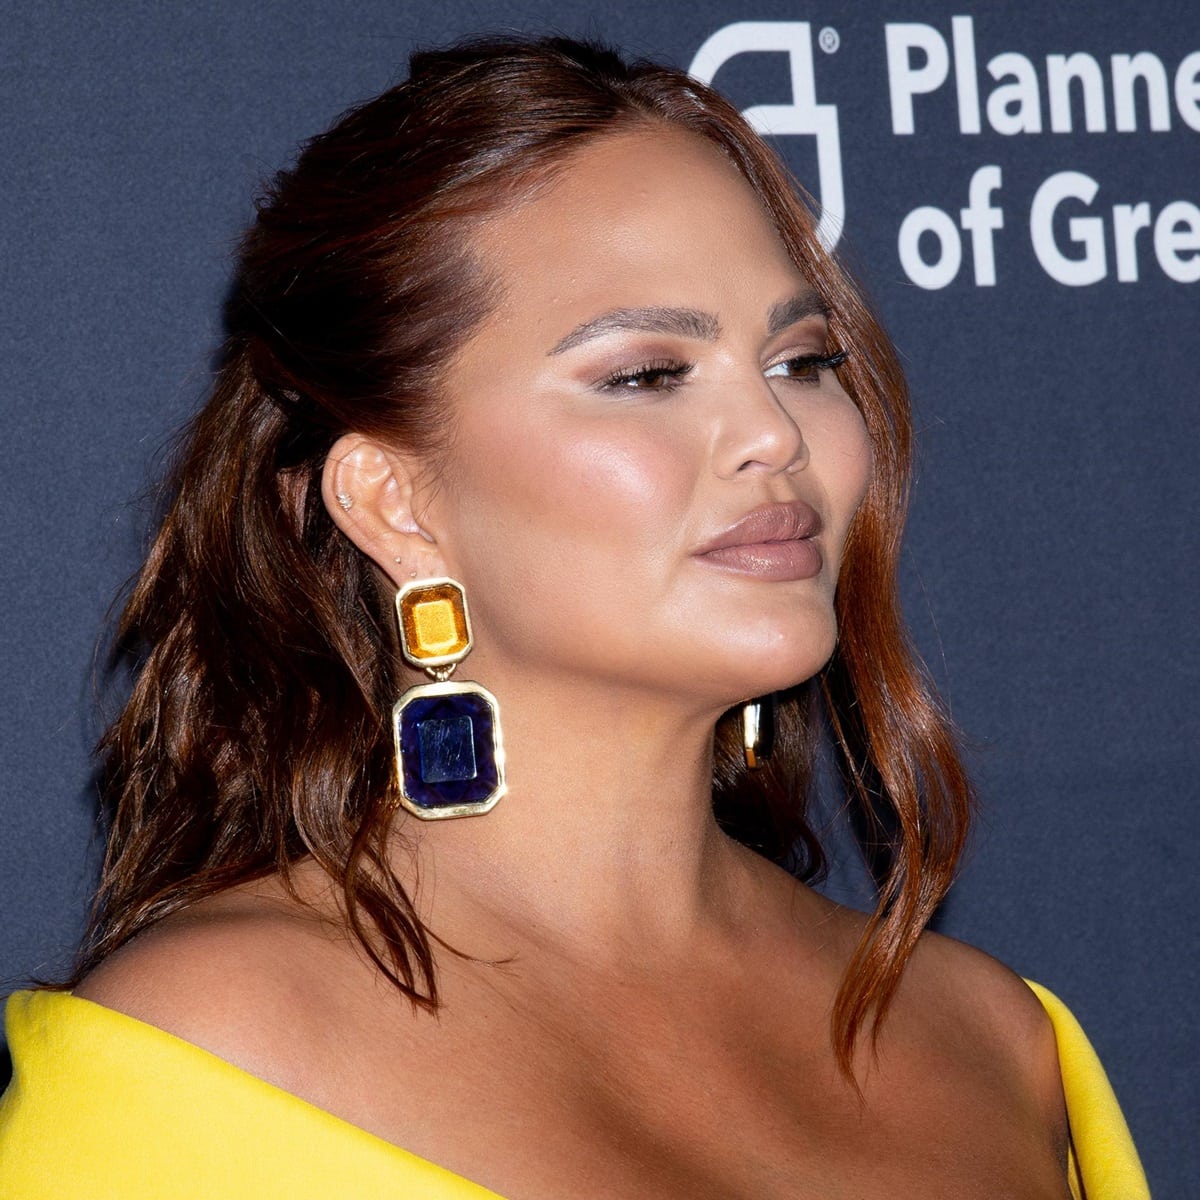 Chrissy Teigen's clip-on earrings from Saint Laurent feature a resin-replica faceted stone design that adds texture and depth to any outfit while keeping the earrings lightweight